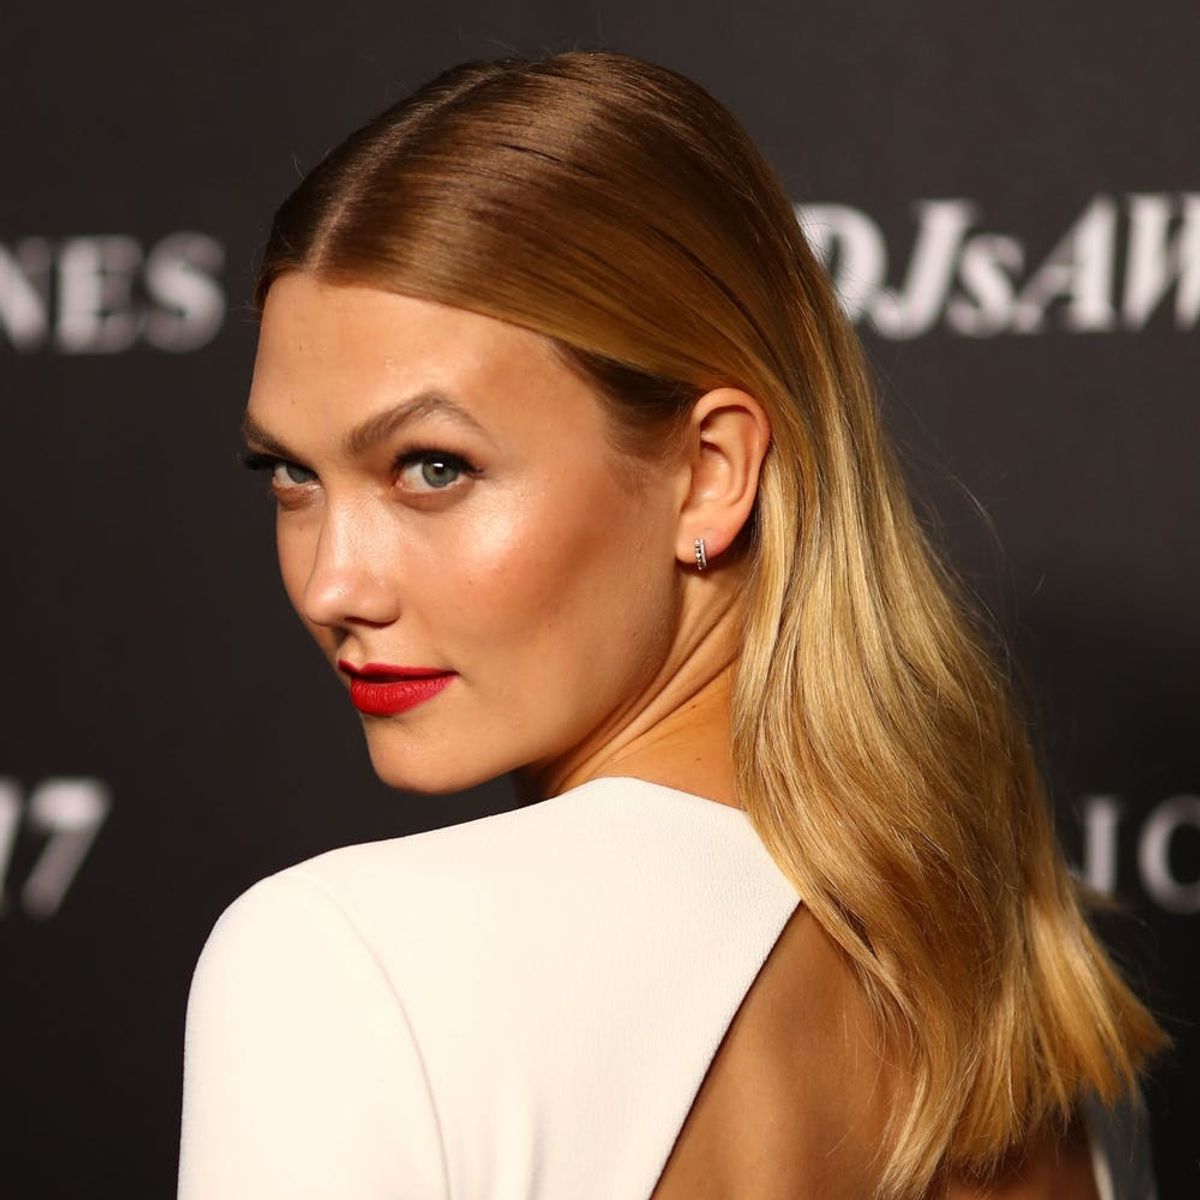 Twitter Is Furious That Vogue Put Karlie Kloss in Yellowface for Their Diversity Issue